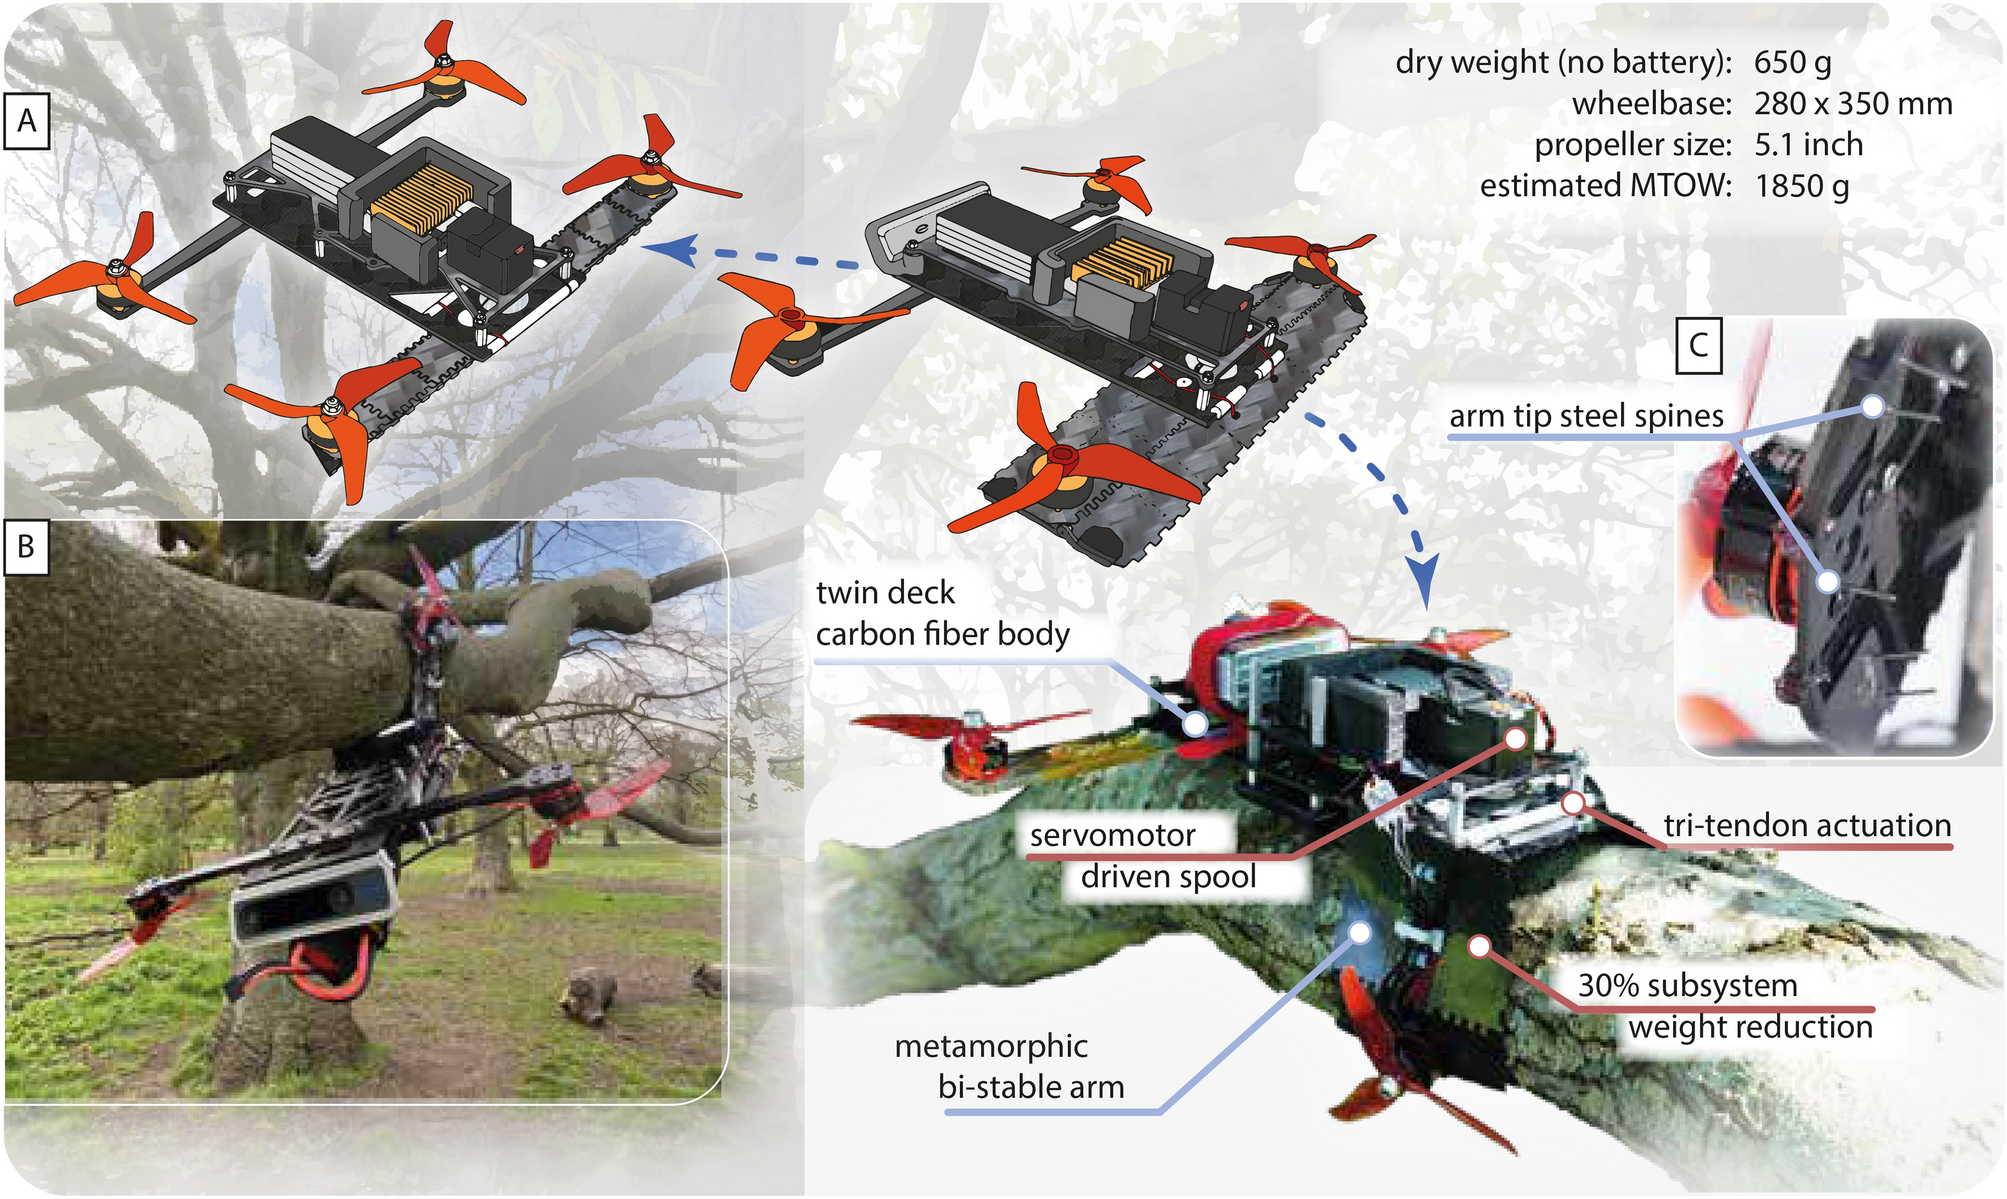 Metamorphic aerial robot capable of mid-air shape morphing for rapid  perching